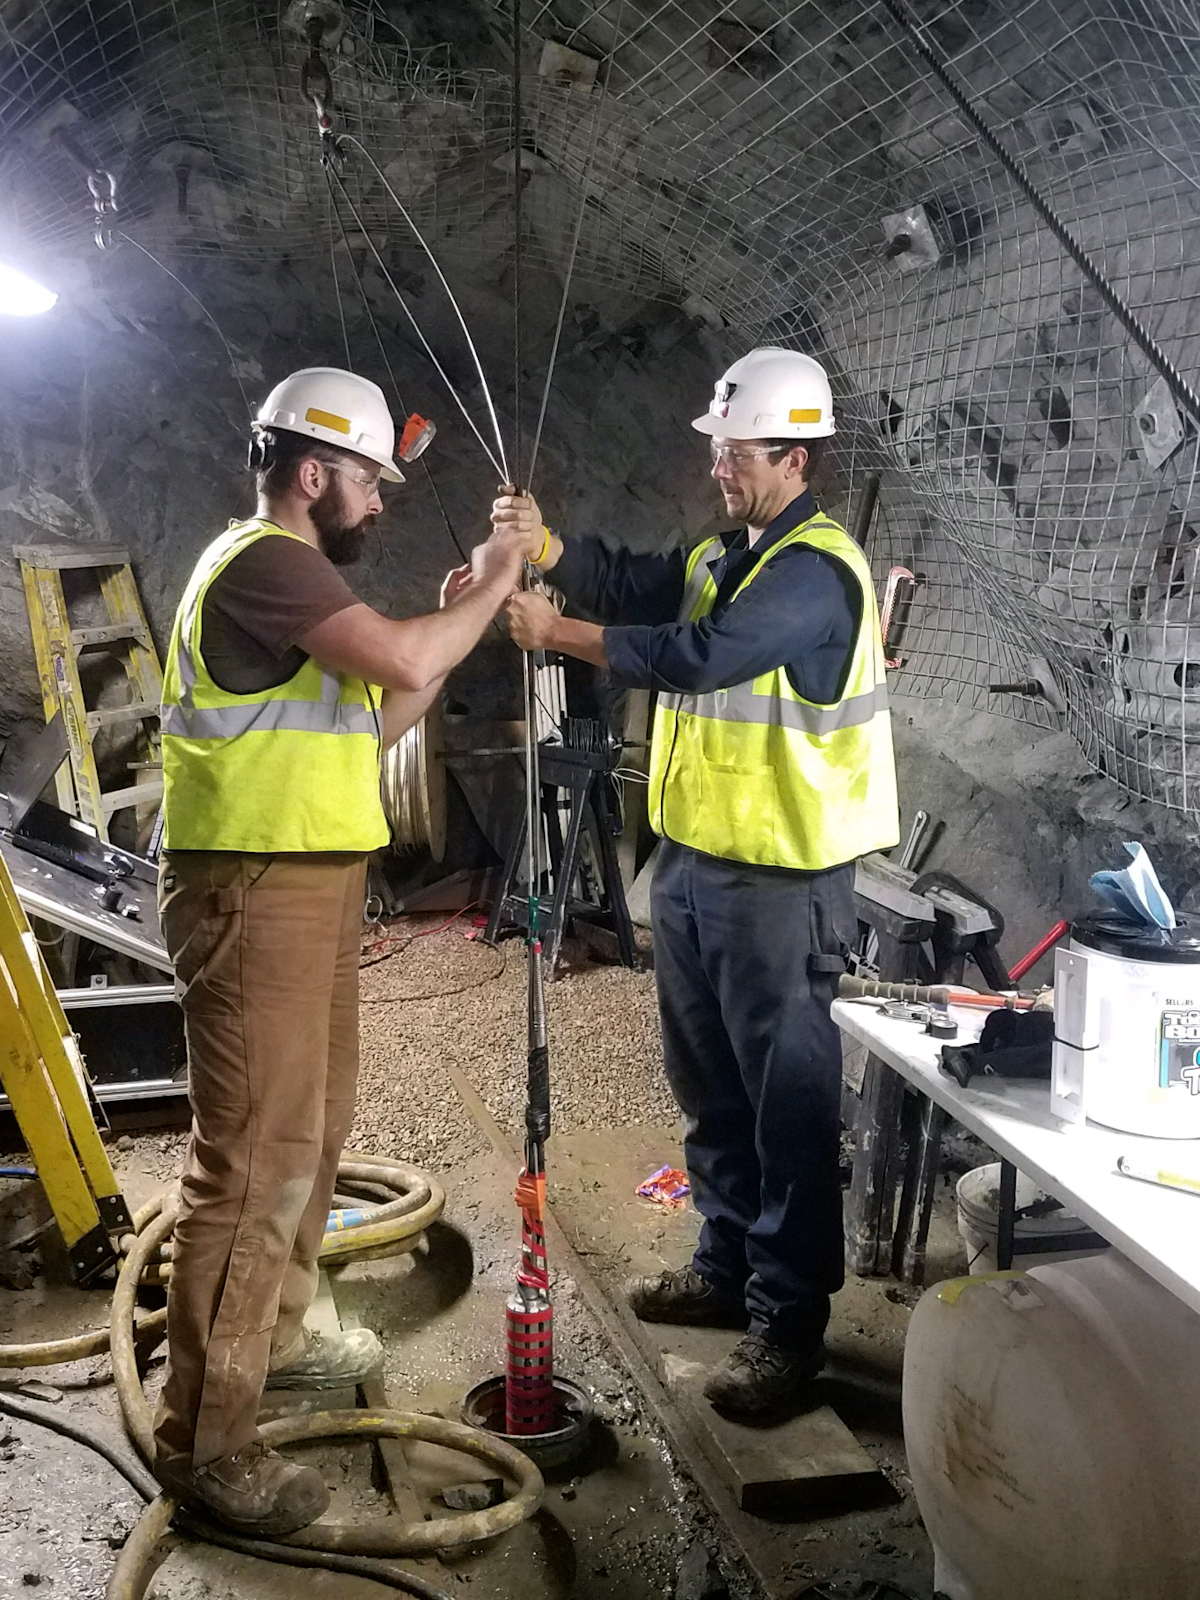 PNNL researcher Jeff Burghardt (left) works at the Sanford Underground Research Facility site with Joseph Pope (right) from Sandia National Laboratories during the EGS Collab experiment. Burghardt and Pope lower a tool into a well on the 4100 level of SURF to make measurements of the stress in the rock. 